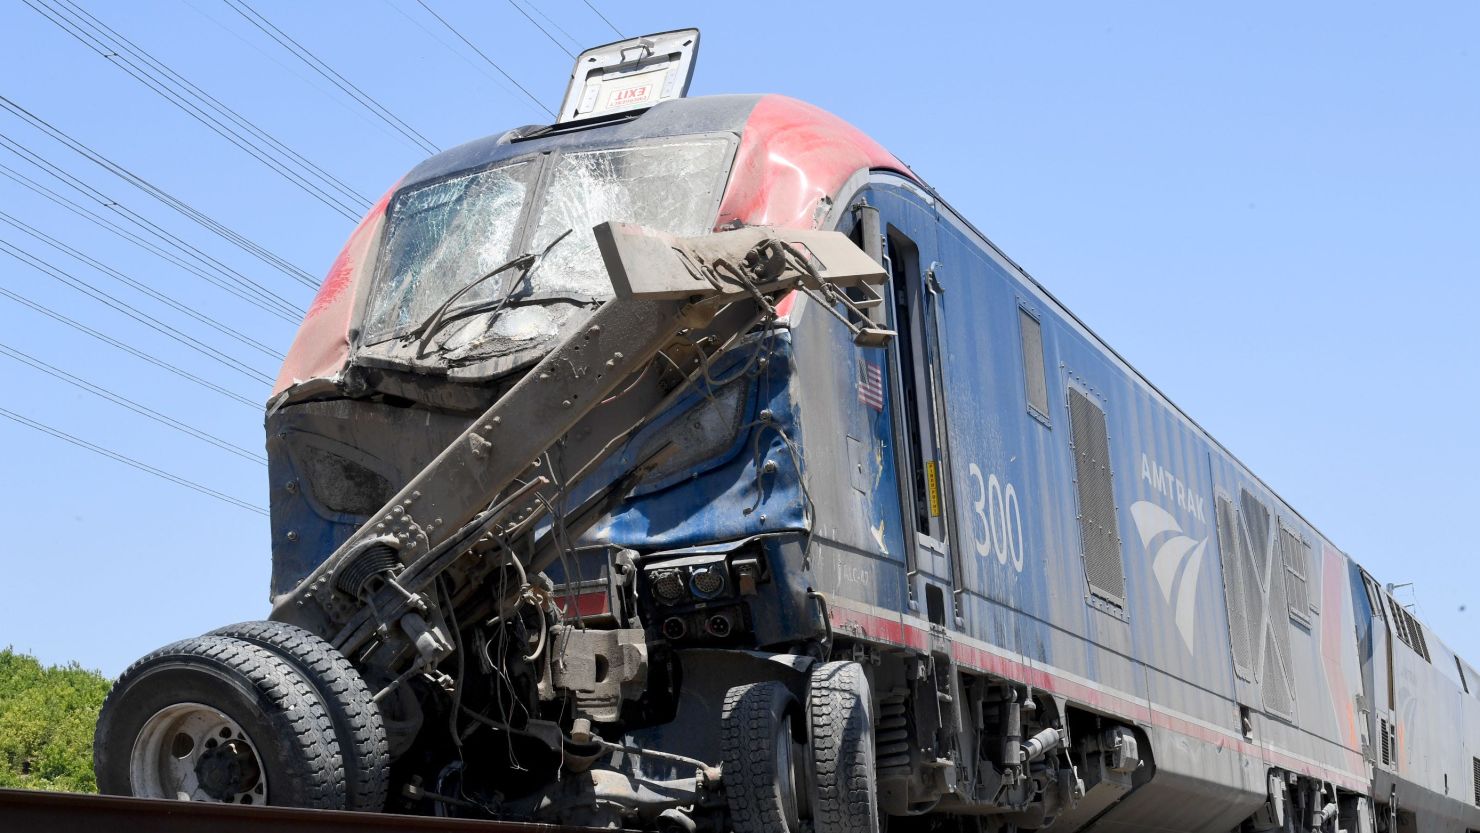 An Amtrak train partially derailed after striking a vehicle on the tracks in Moorpark, California, on June 28, 2023, authorities said.